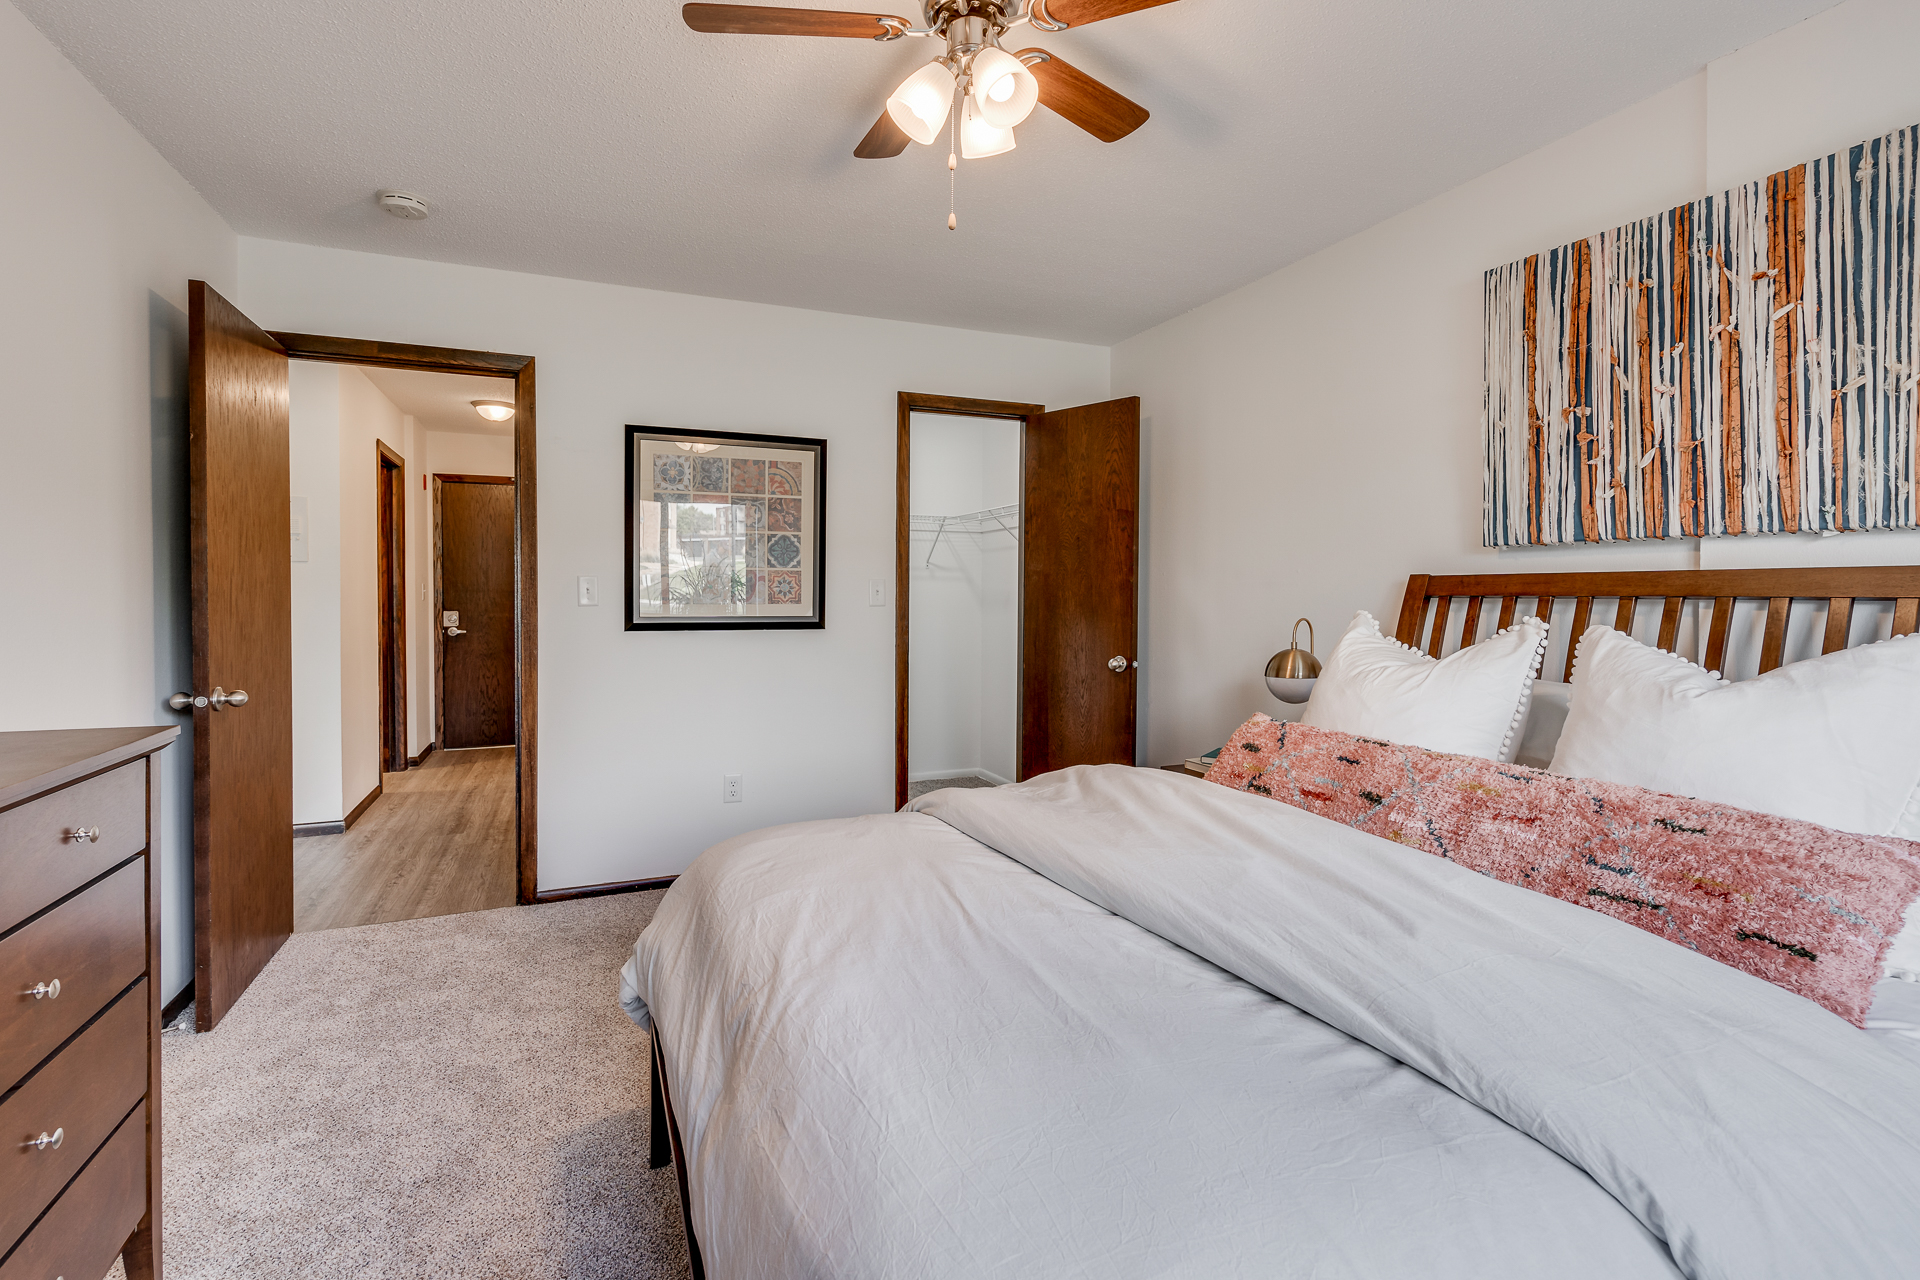 Carpeted Bedrooms And Spacious Closets At Sumter Green Apartments In Crystal, MN